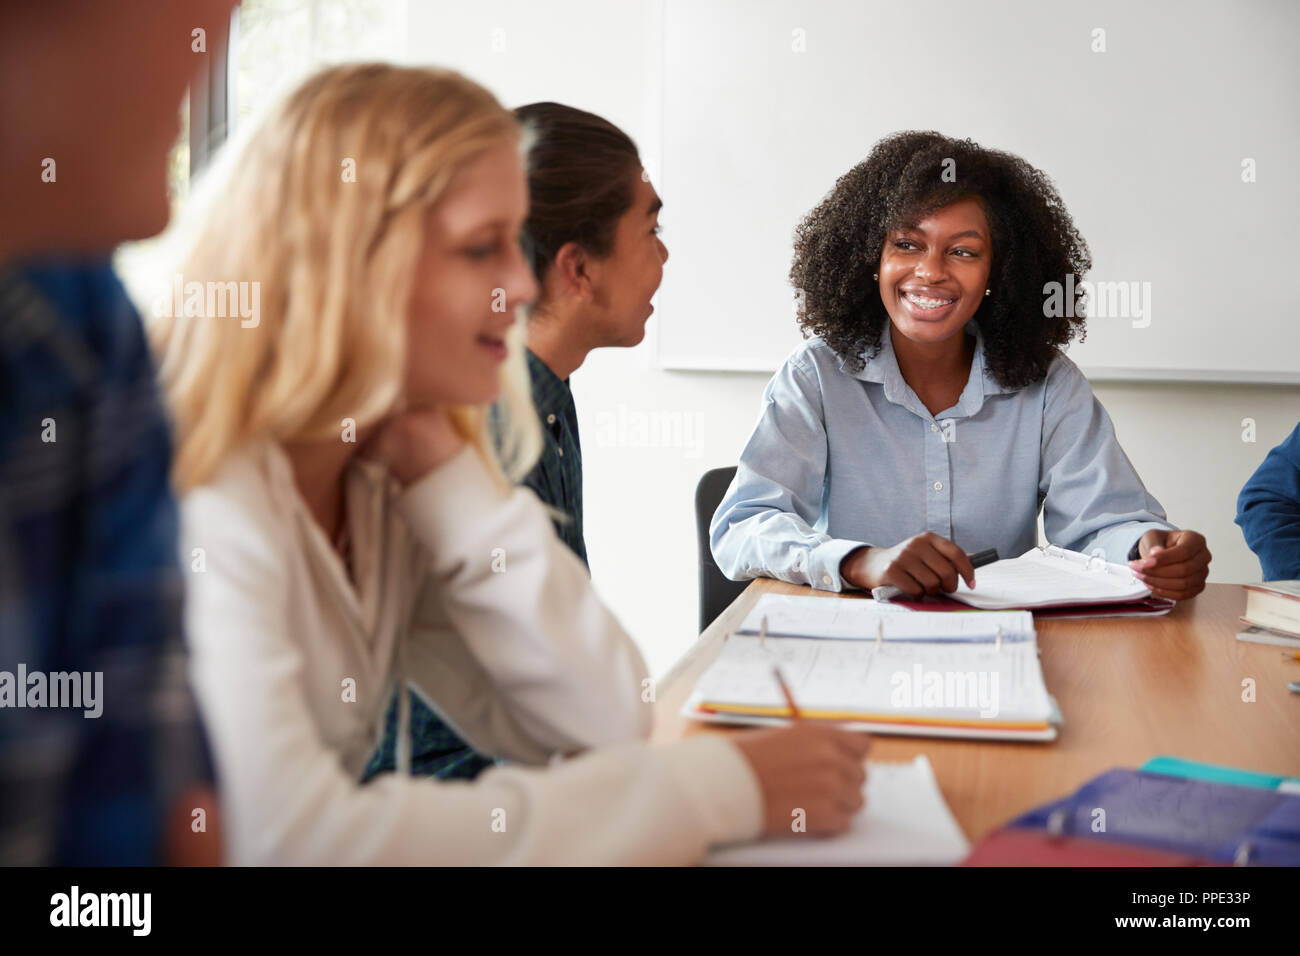 Female High School Tutor Sitting At Table With Pupils Teaching Maths Class Stock Photo